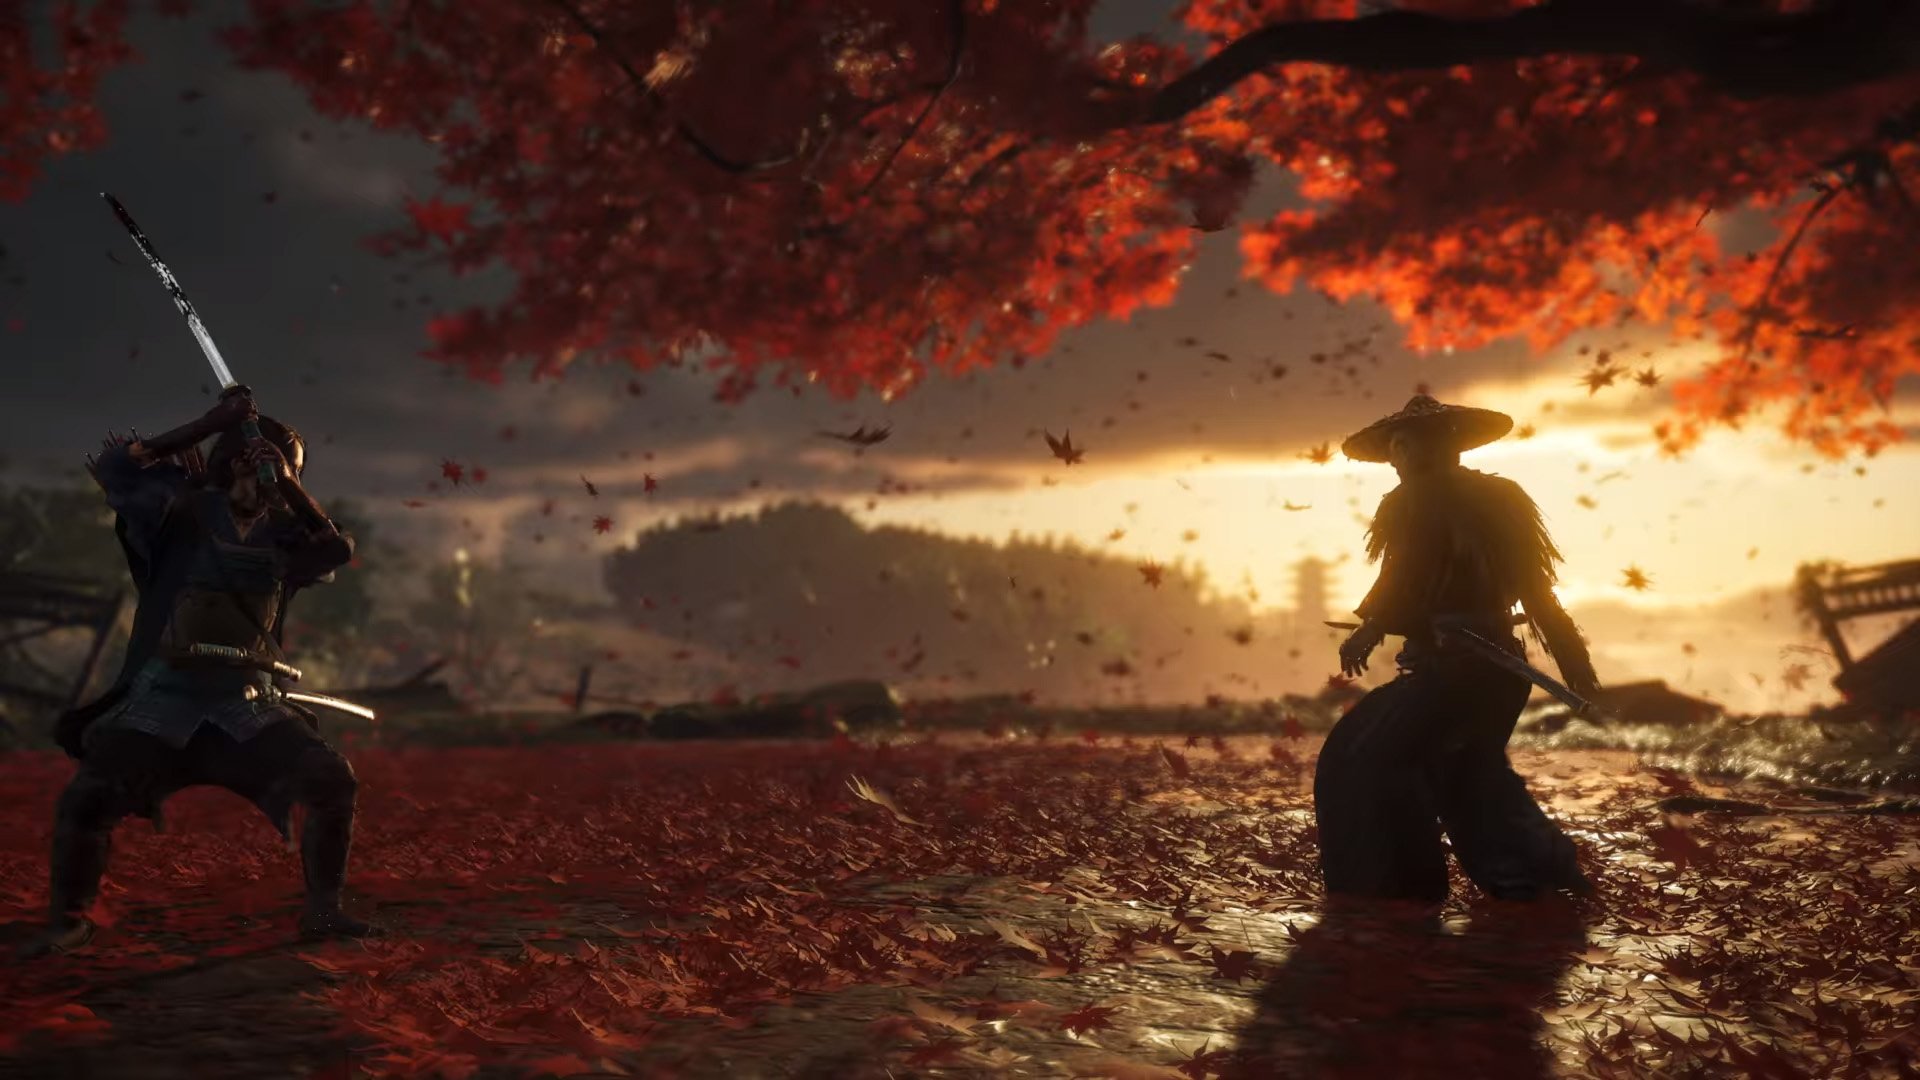 ghost-of-tsushima-ps4-release-date-hype-poll.original.jpg